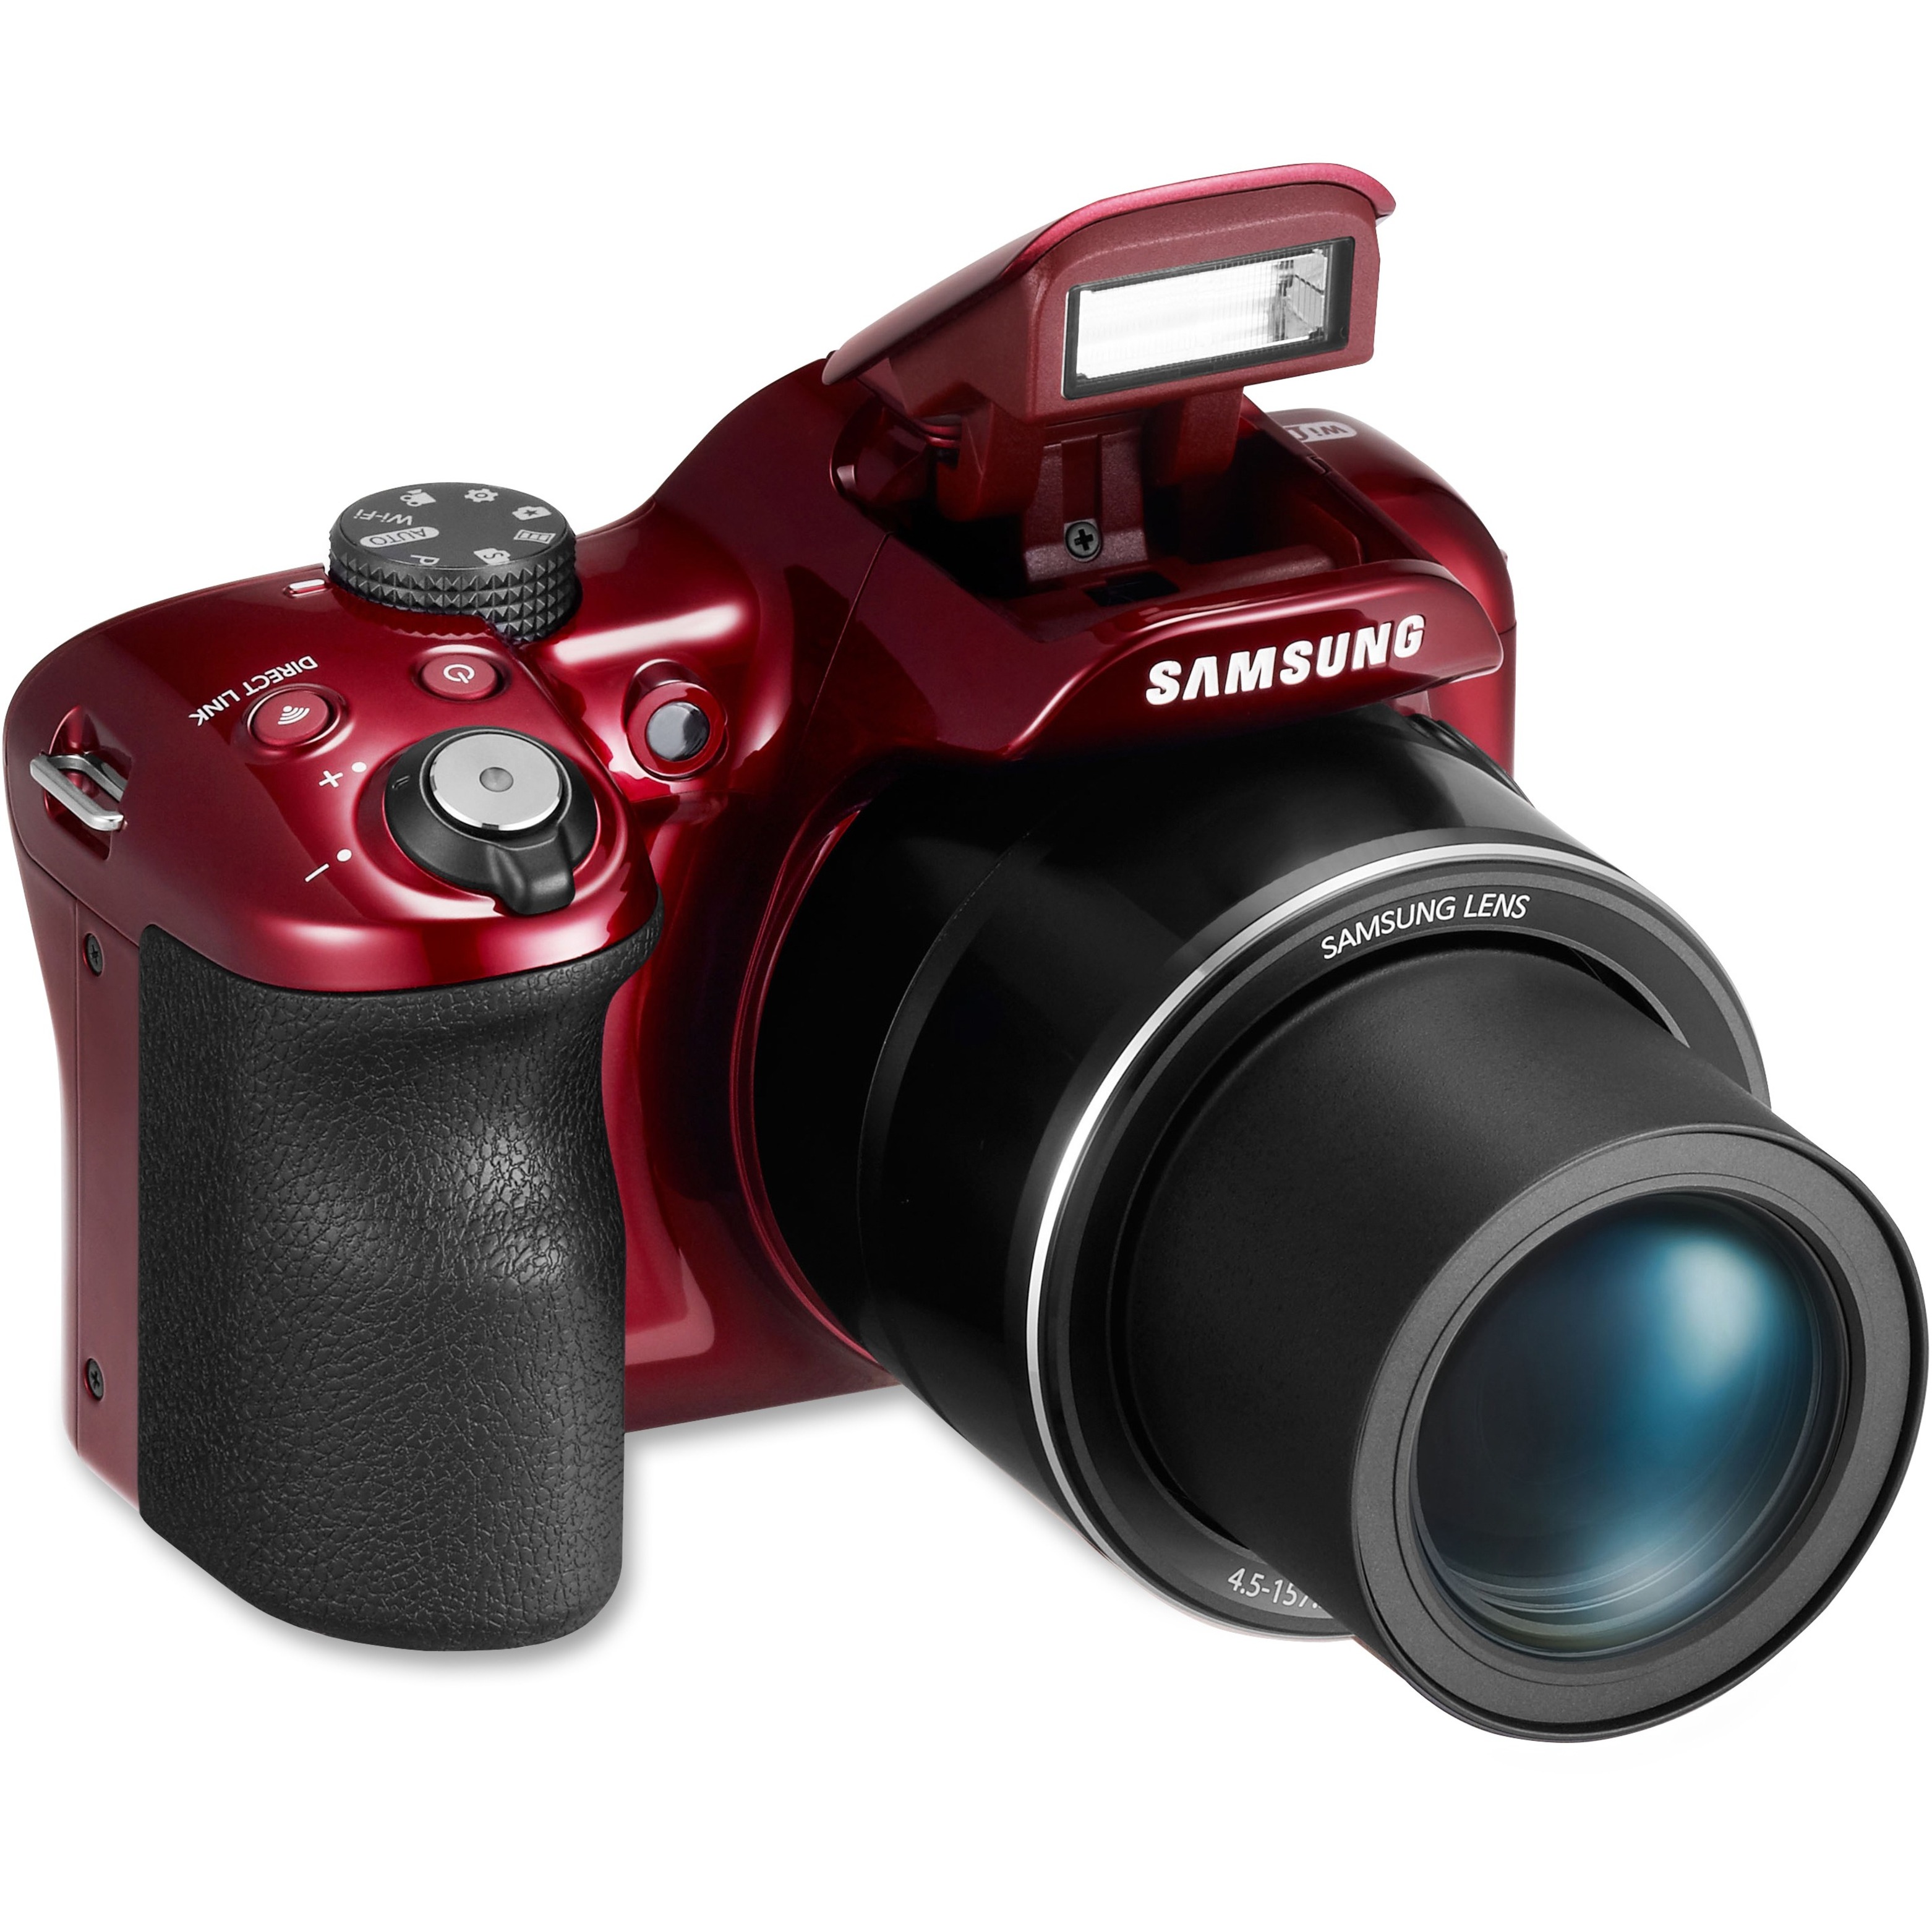 Samsung WB1100F 16.2 Megapixel Compact Camera, Red - image 4 of 5